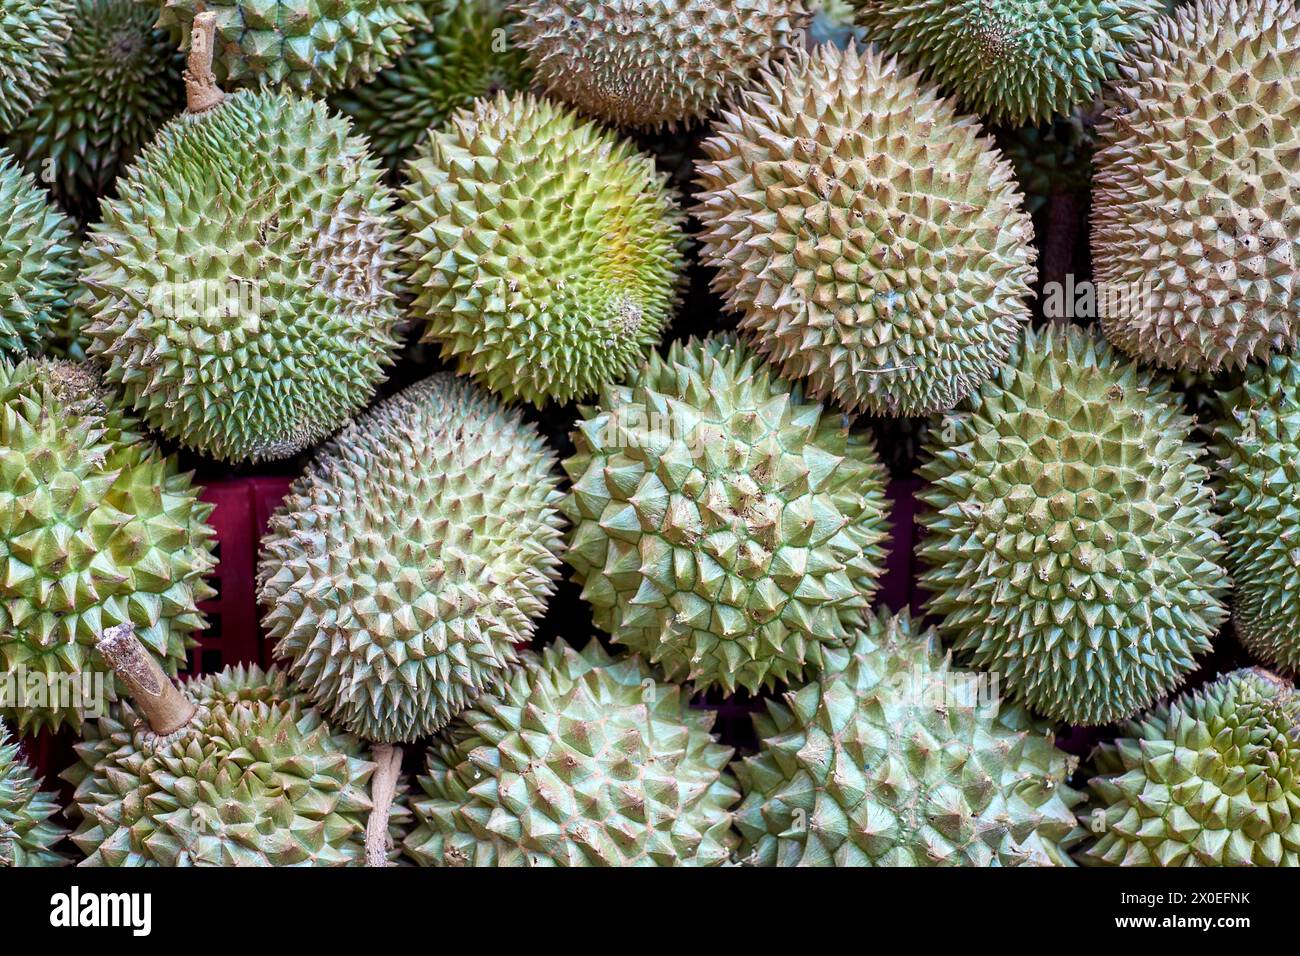 Durian fruit in a market Stock Photo